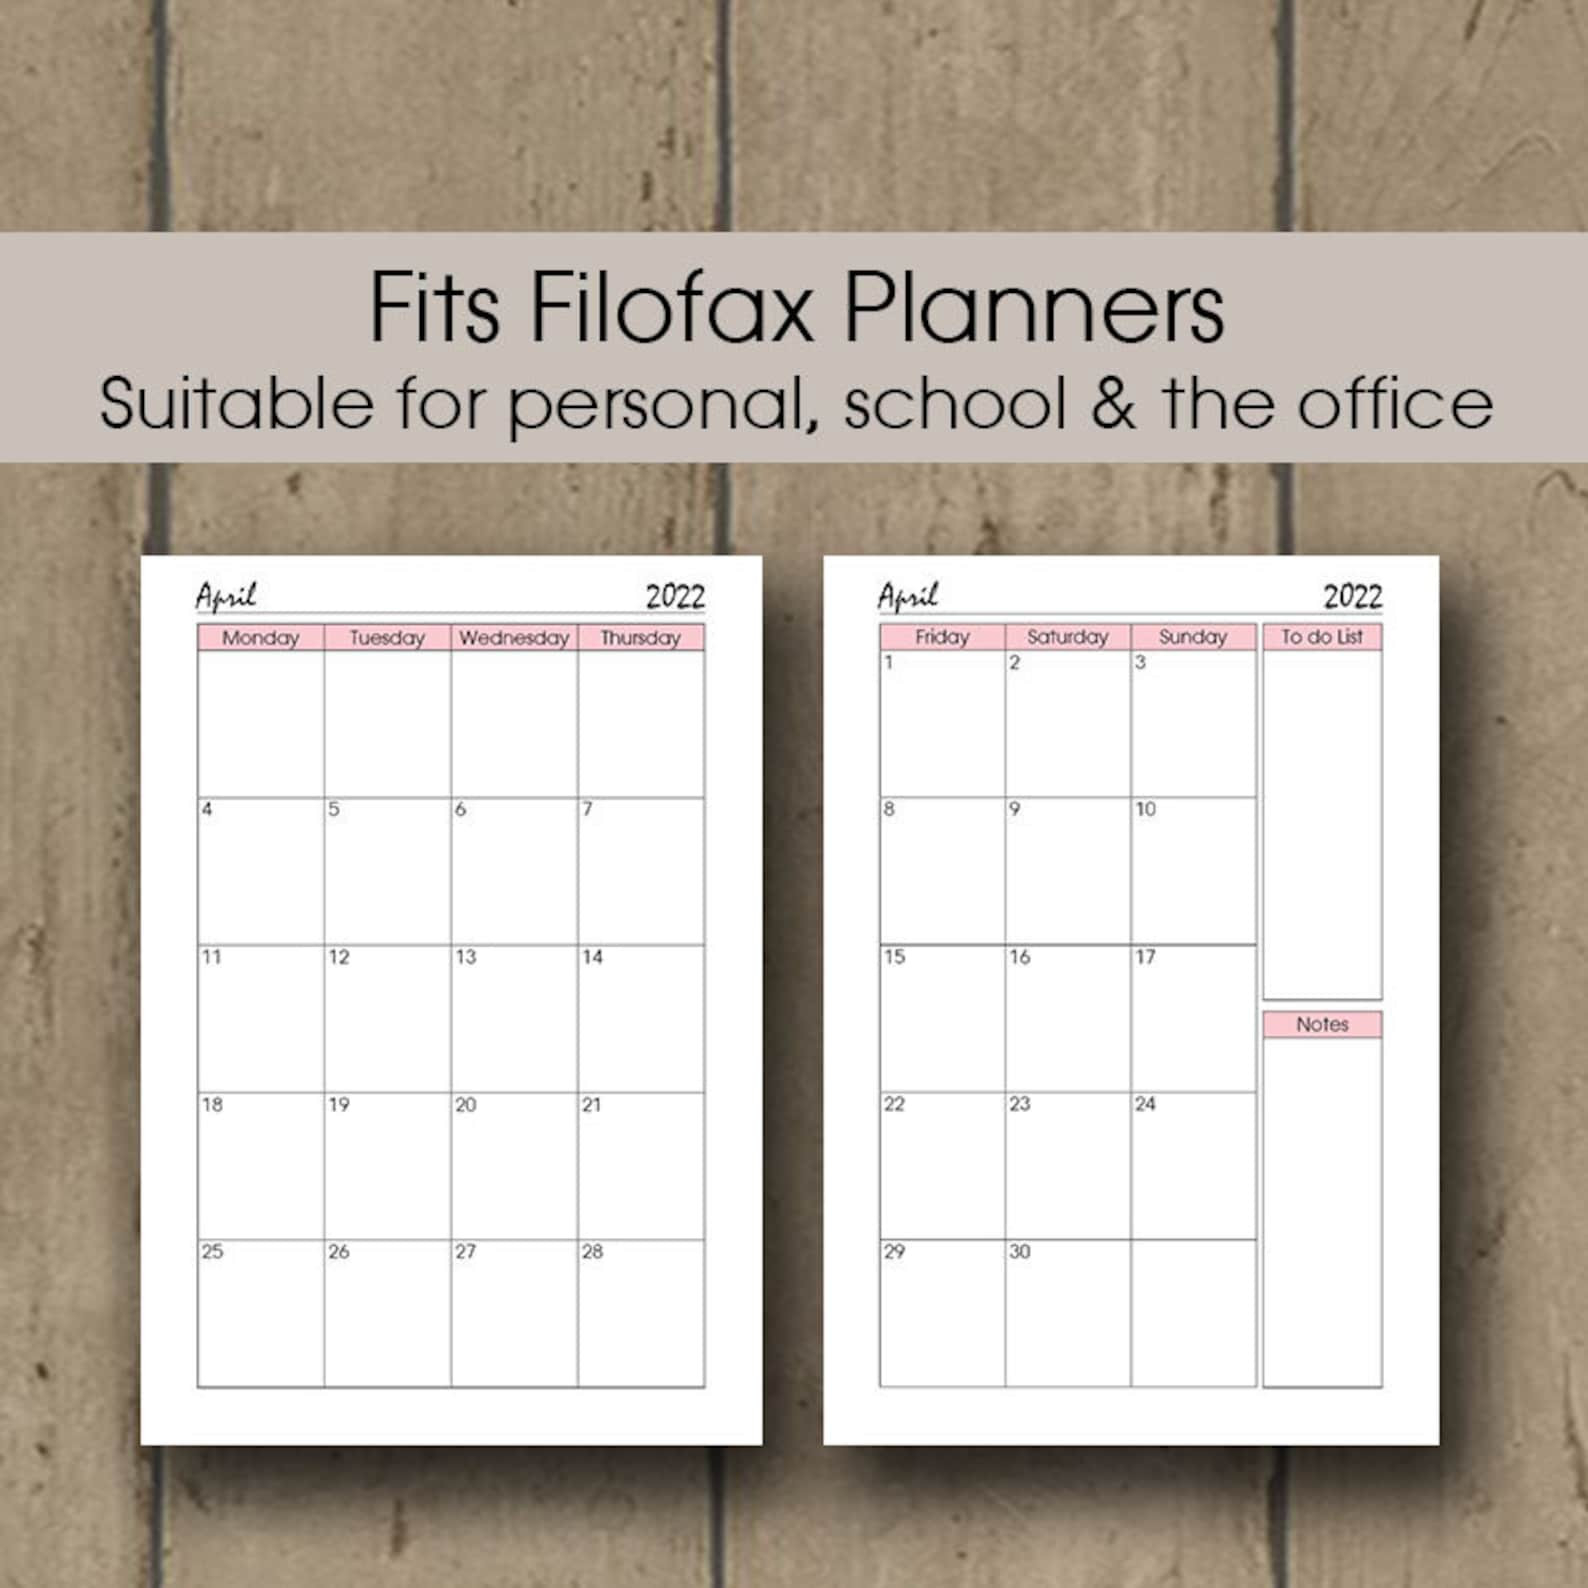 2022 Calendar Page Printable 2022 Monthly Planner Insert  Calendar Pages For 2022 To Print